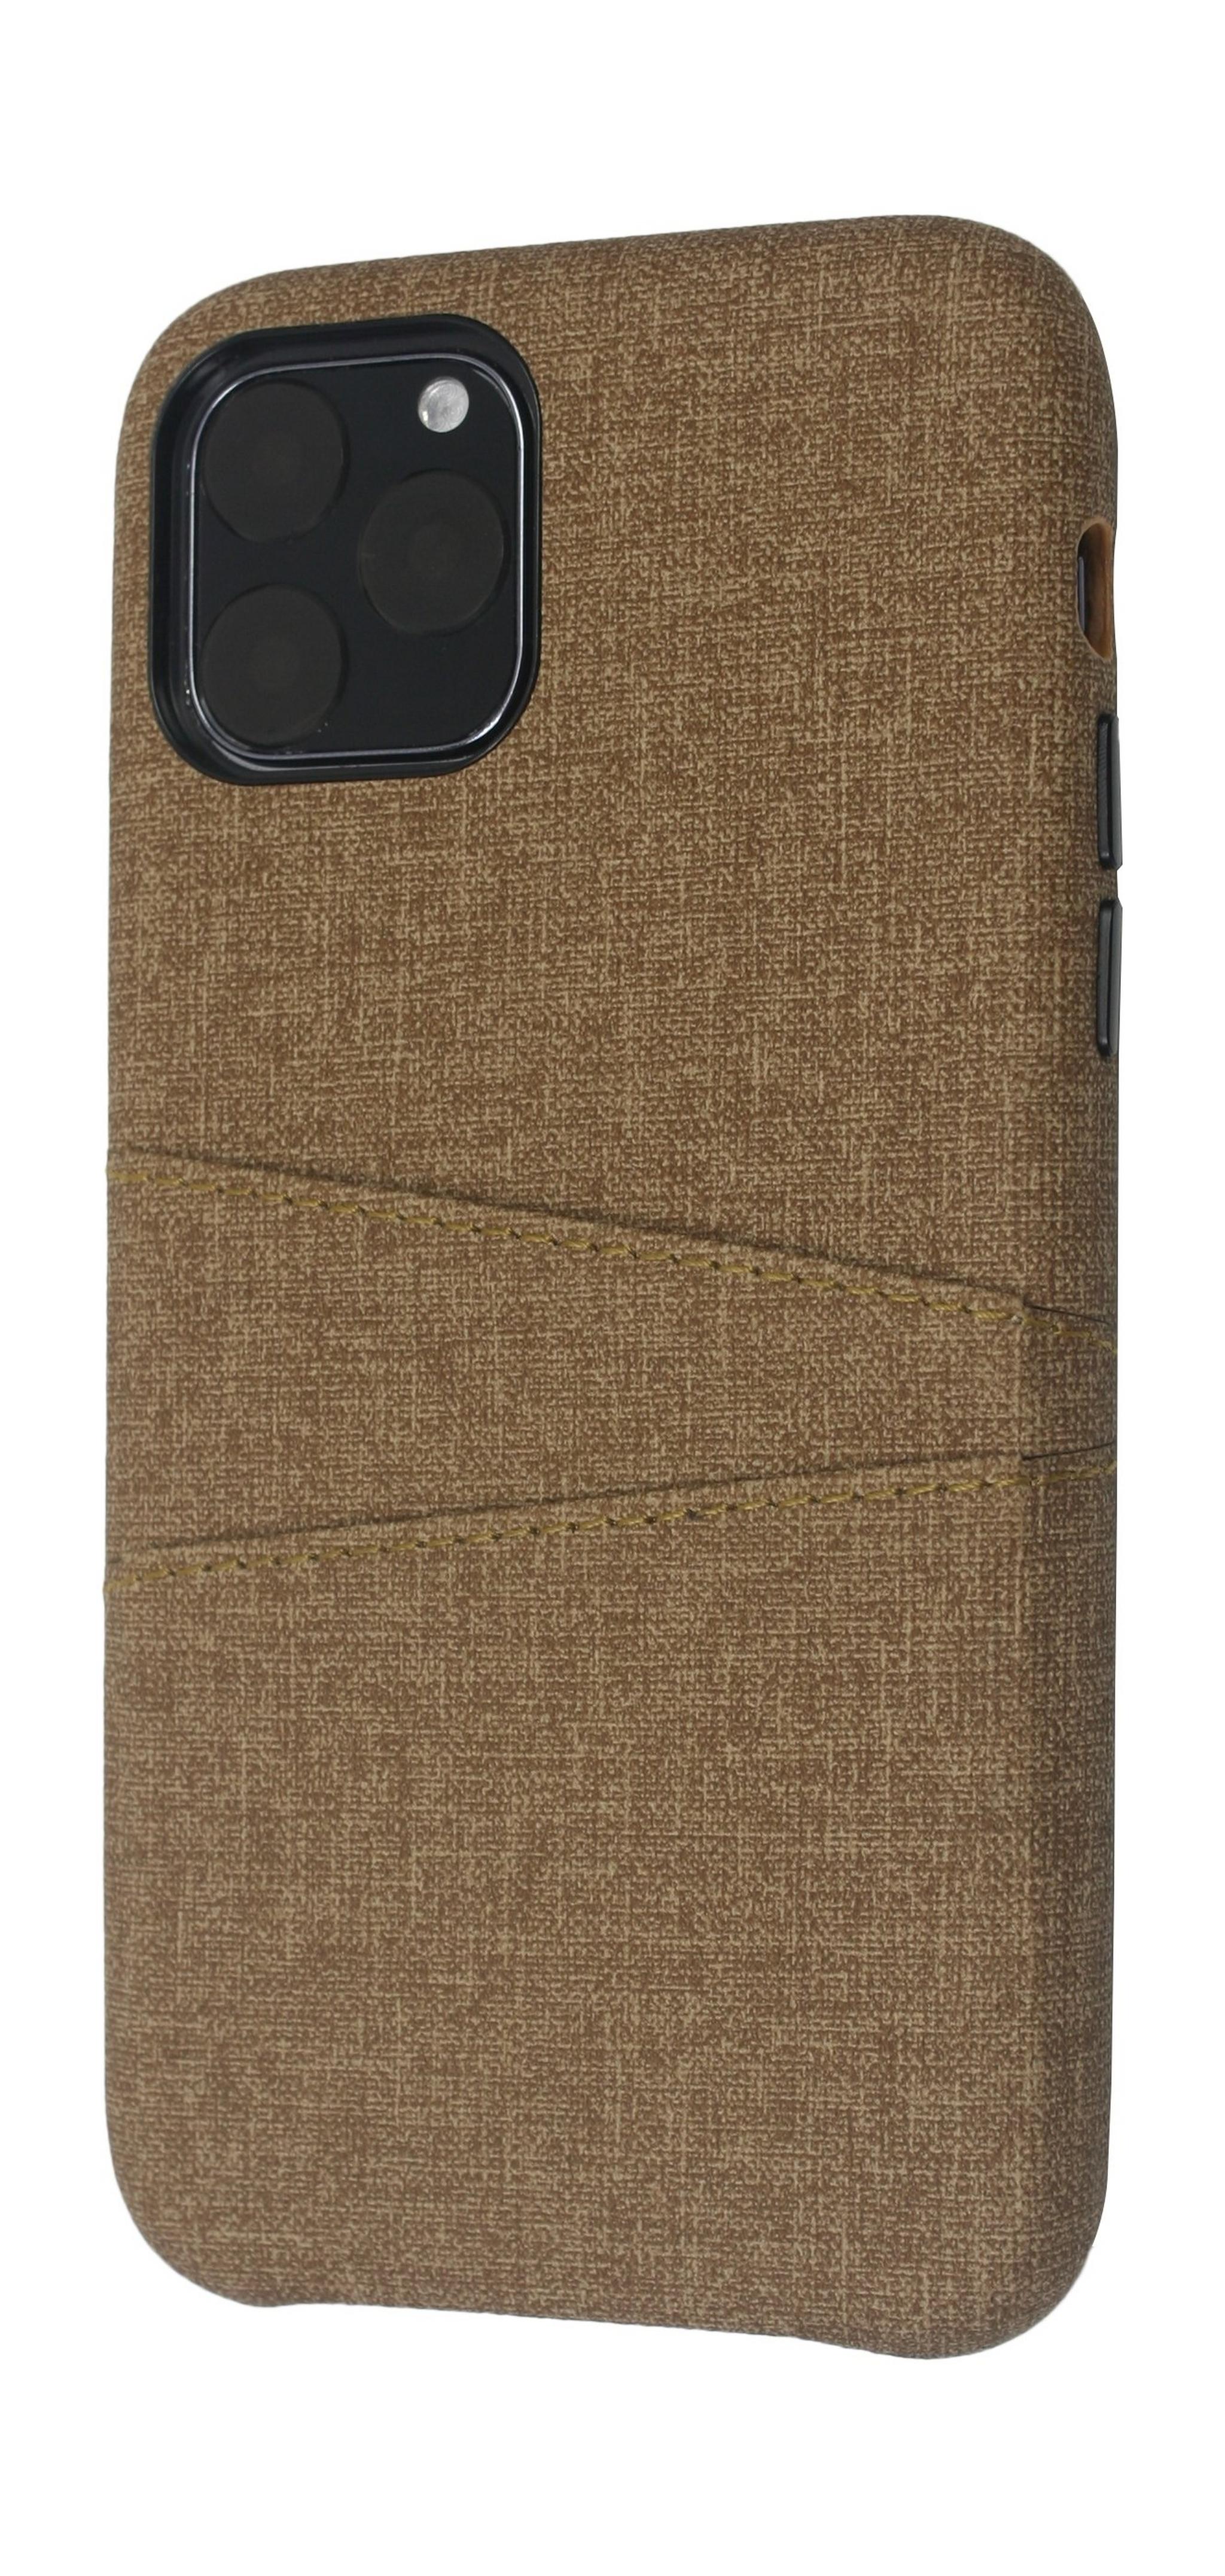 EQ iPhone 11 Pro Max Blank Pocket Back Case - Brown